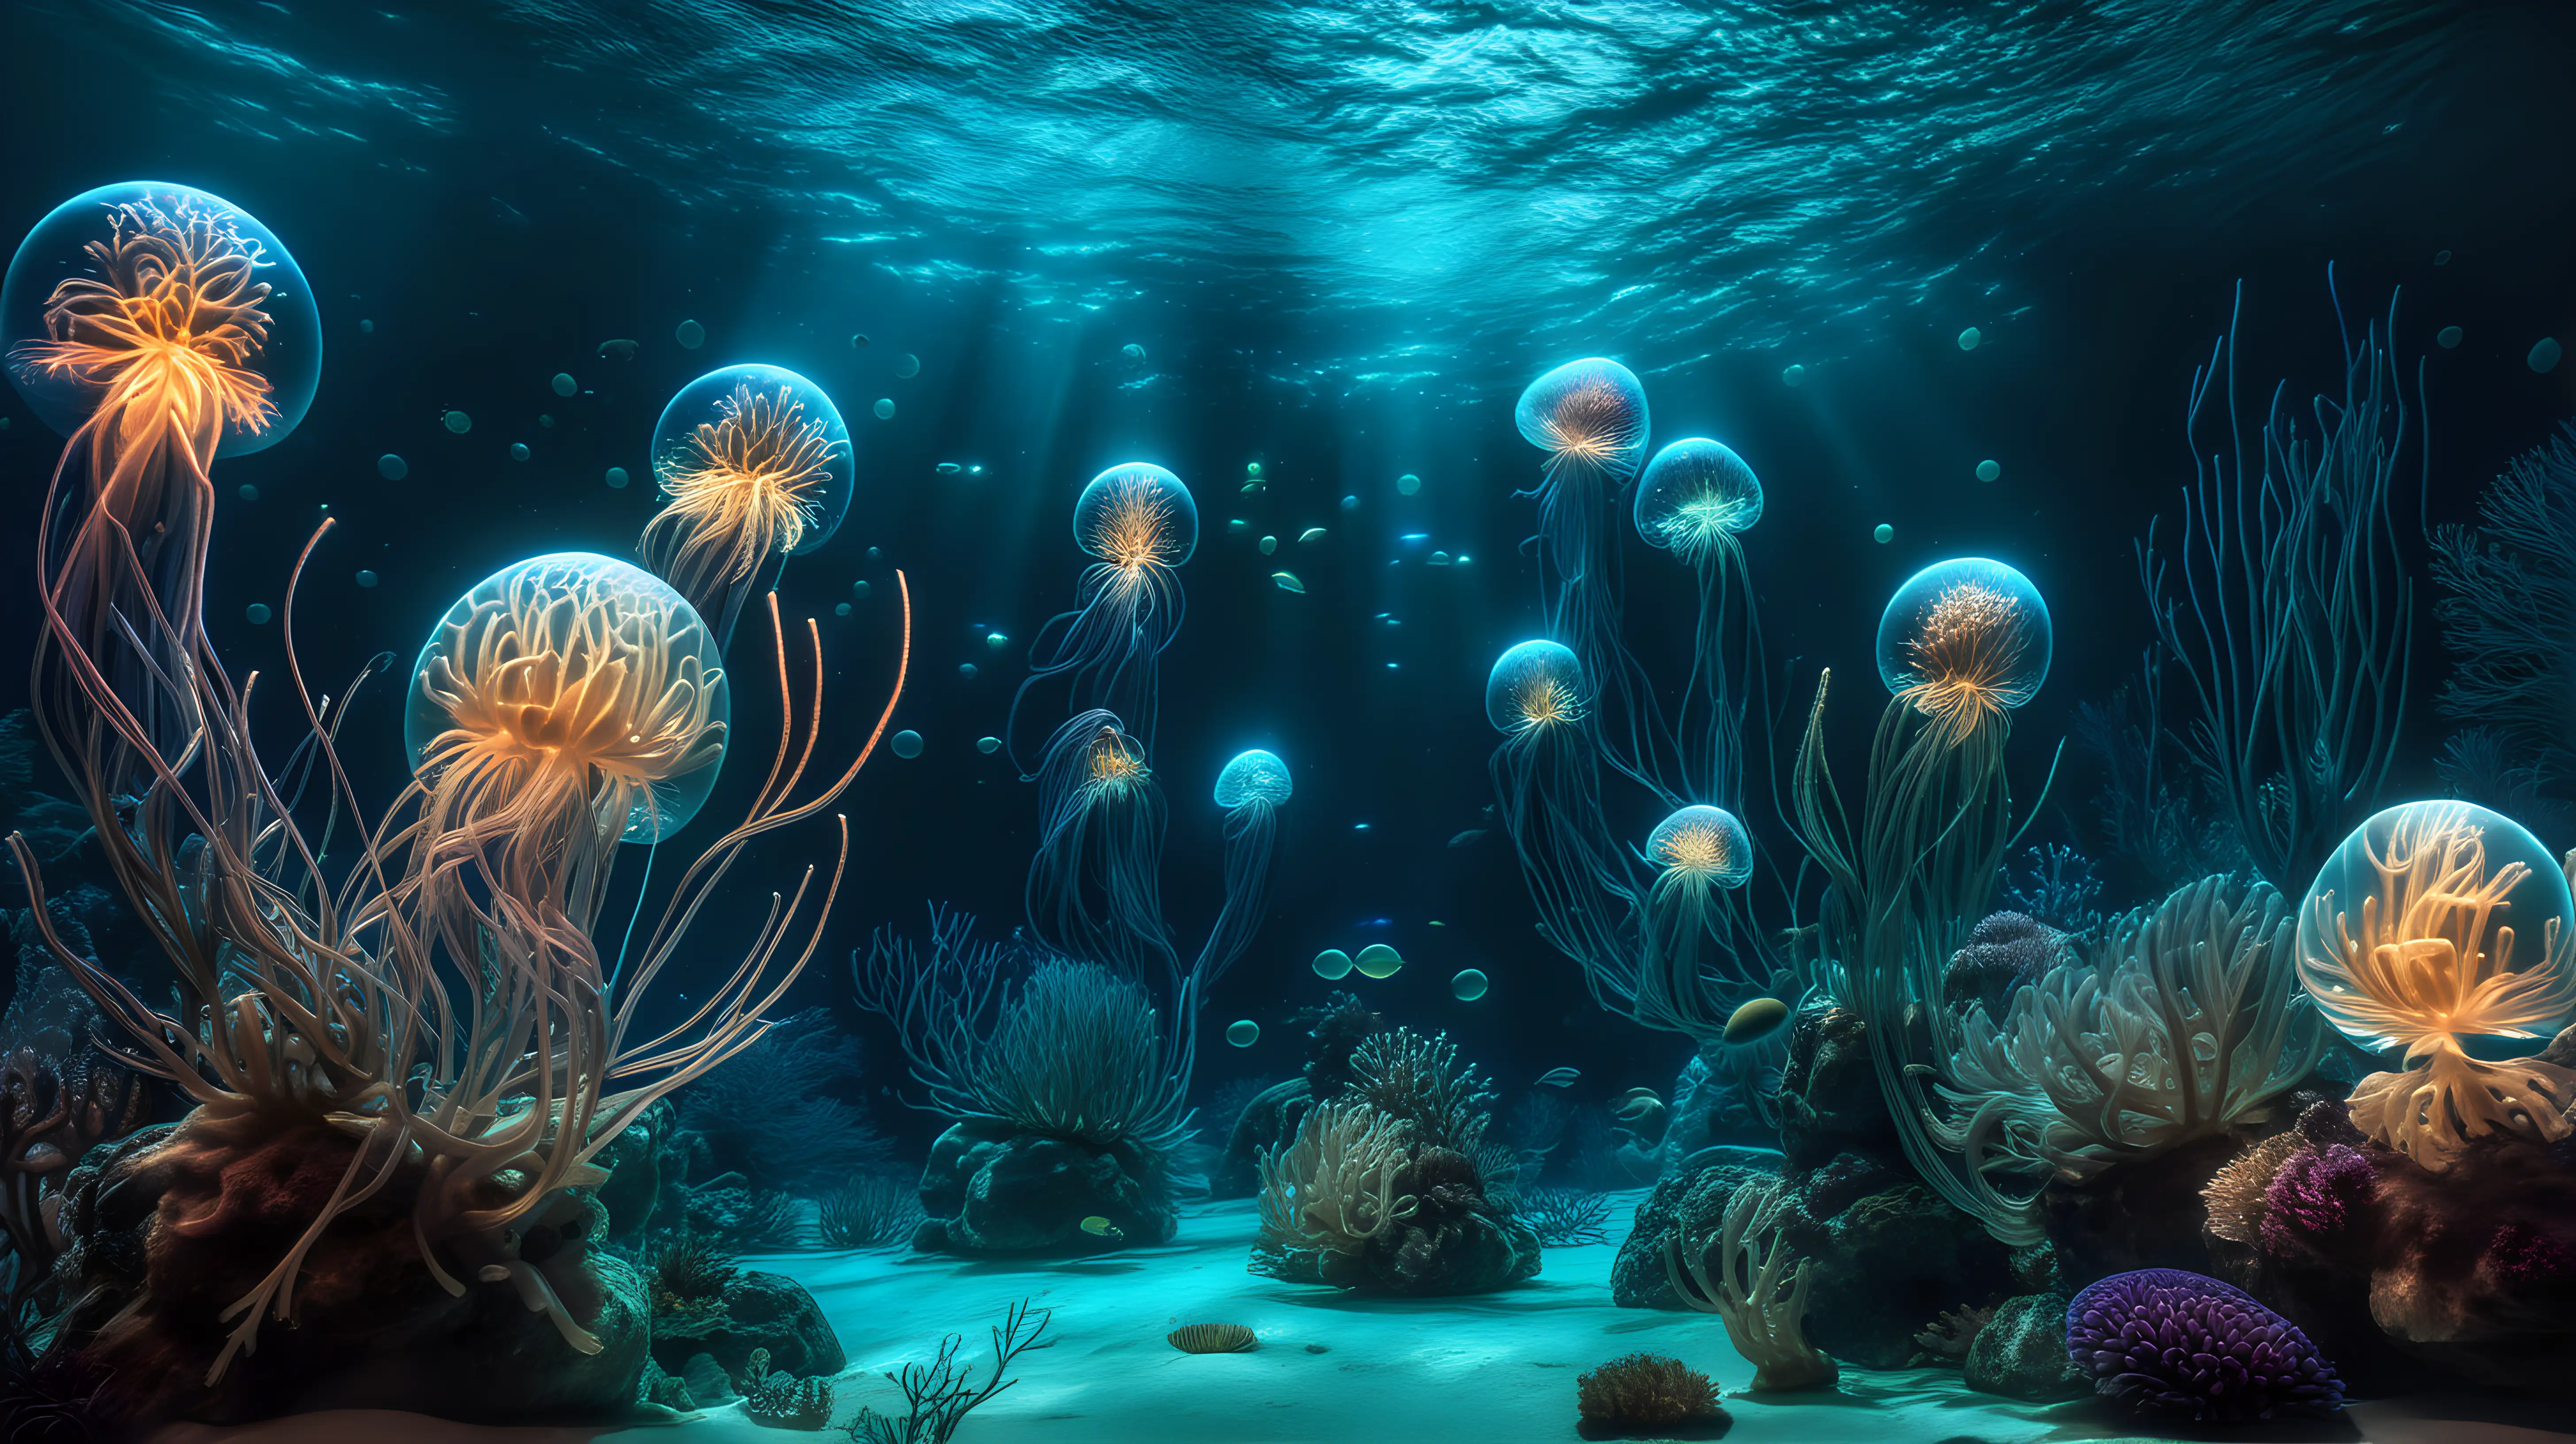 Underwater Luminescence: Create an image that simulates the beauty of bioluminescence underwater, with the luminous spheres resembling underwater organisms in a dark oceanic environment.